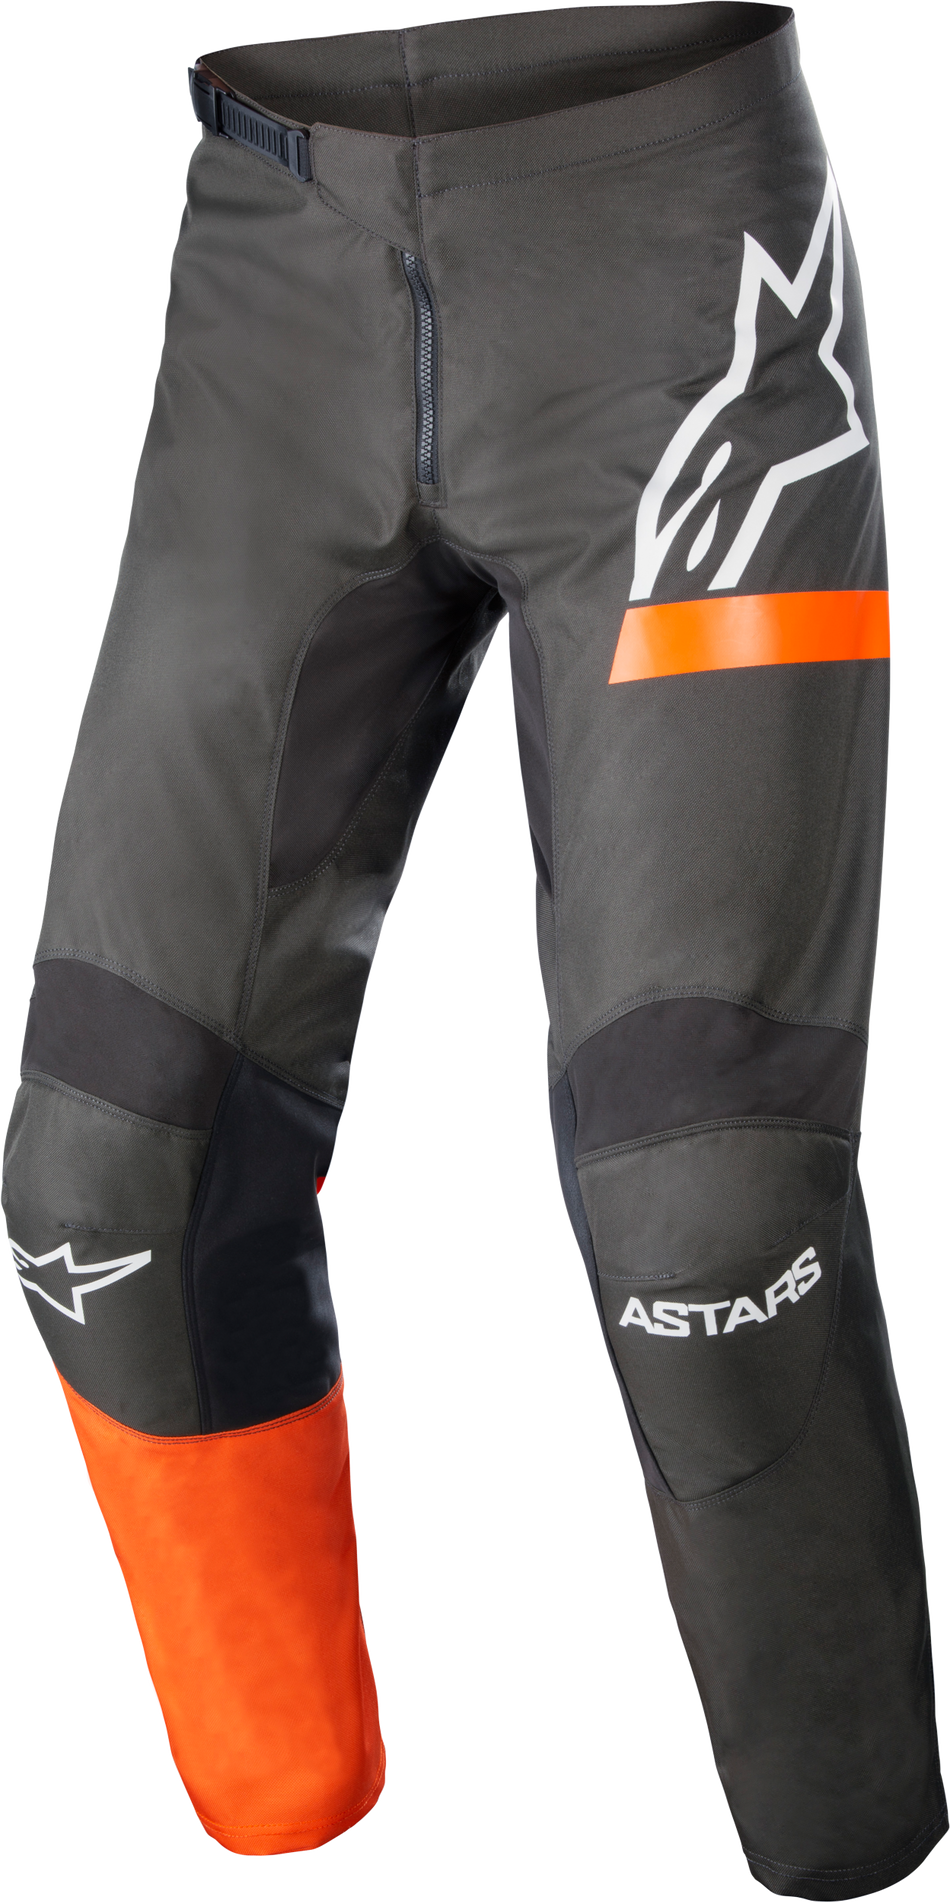 ALPINESTARS Fluid Chaser Pants Anthracite/Coral Fluo Sz 28 3722422-1794-28